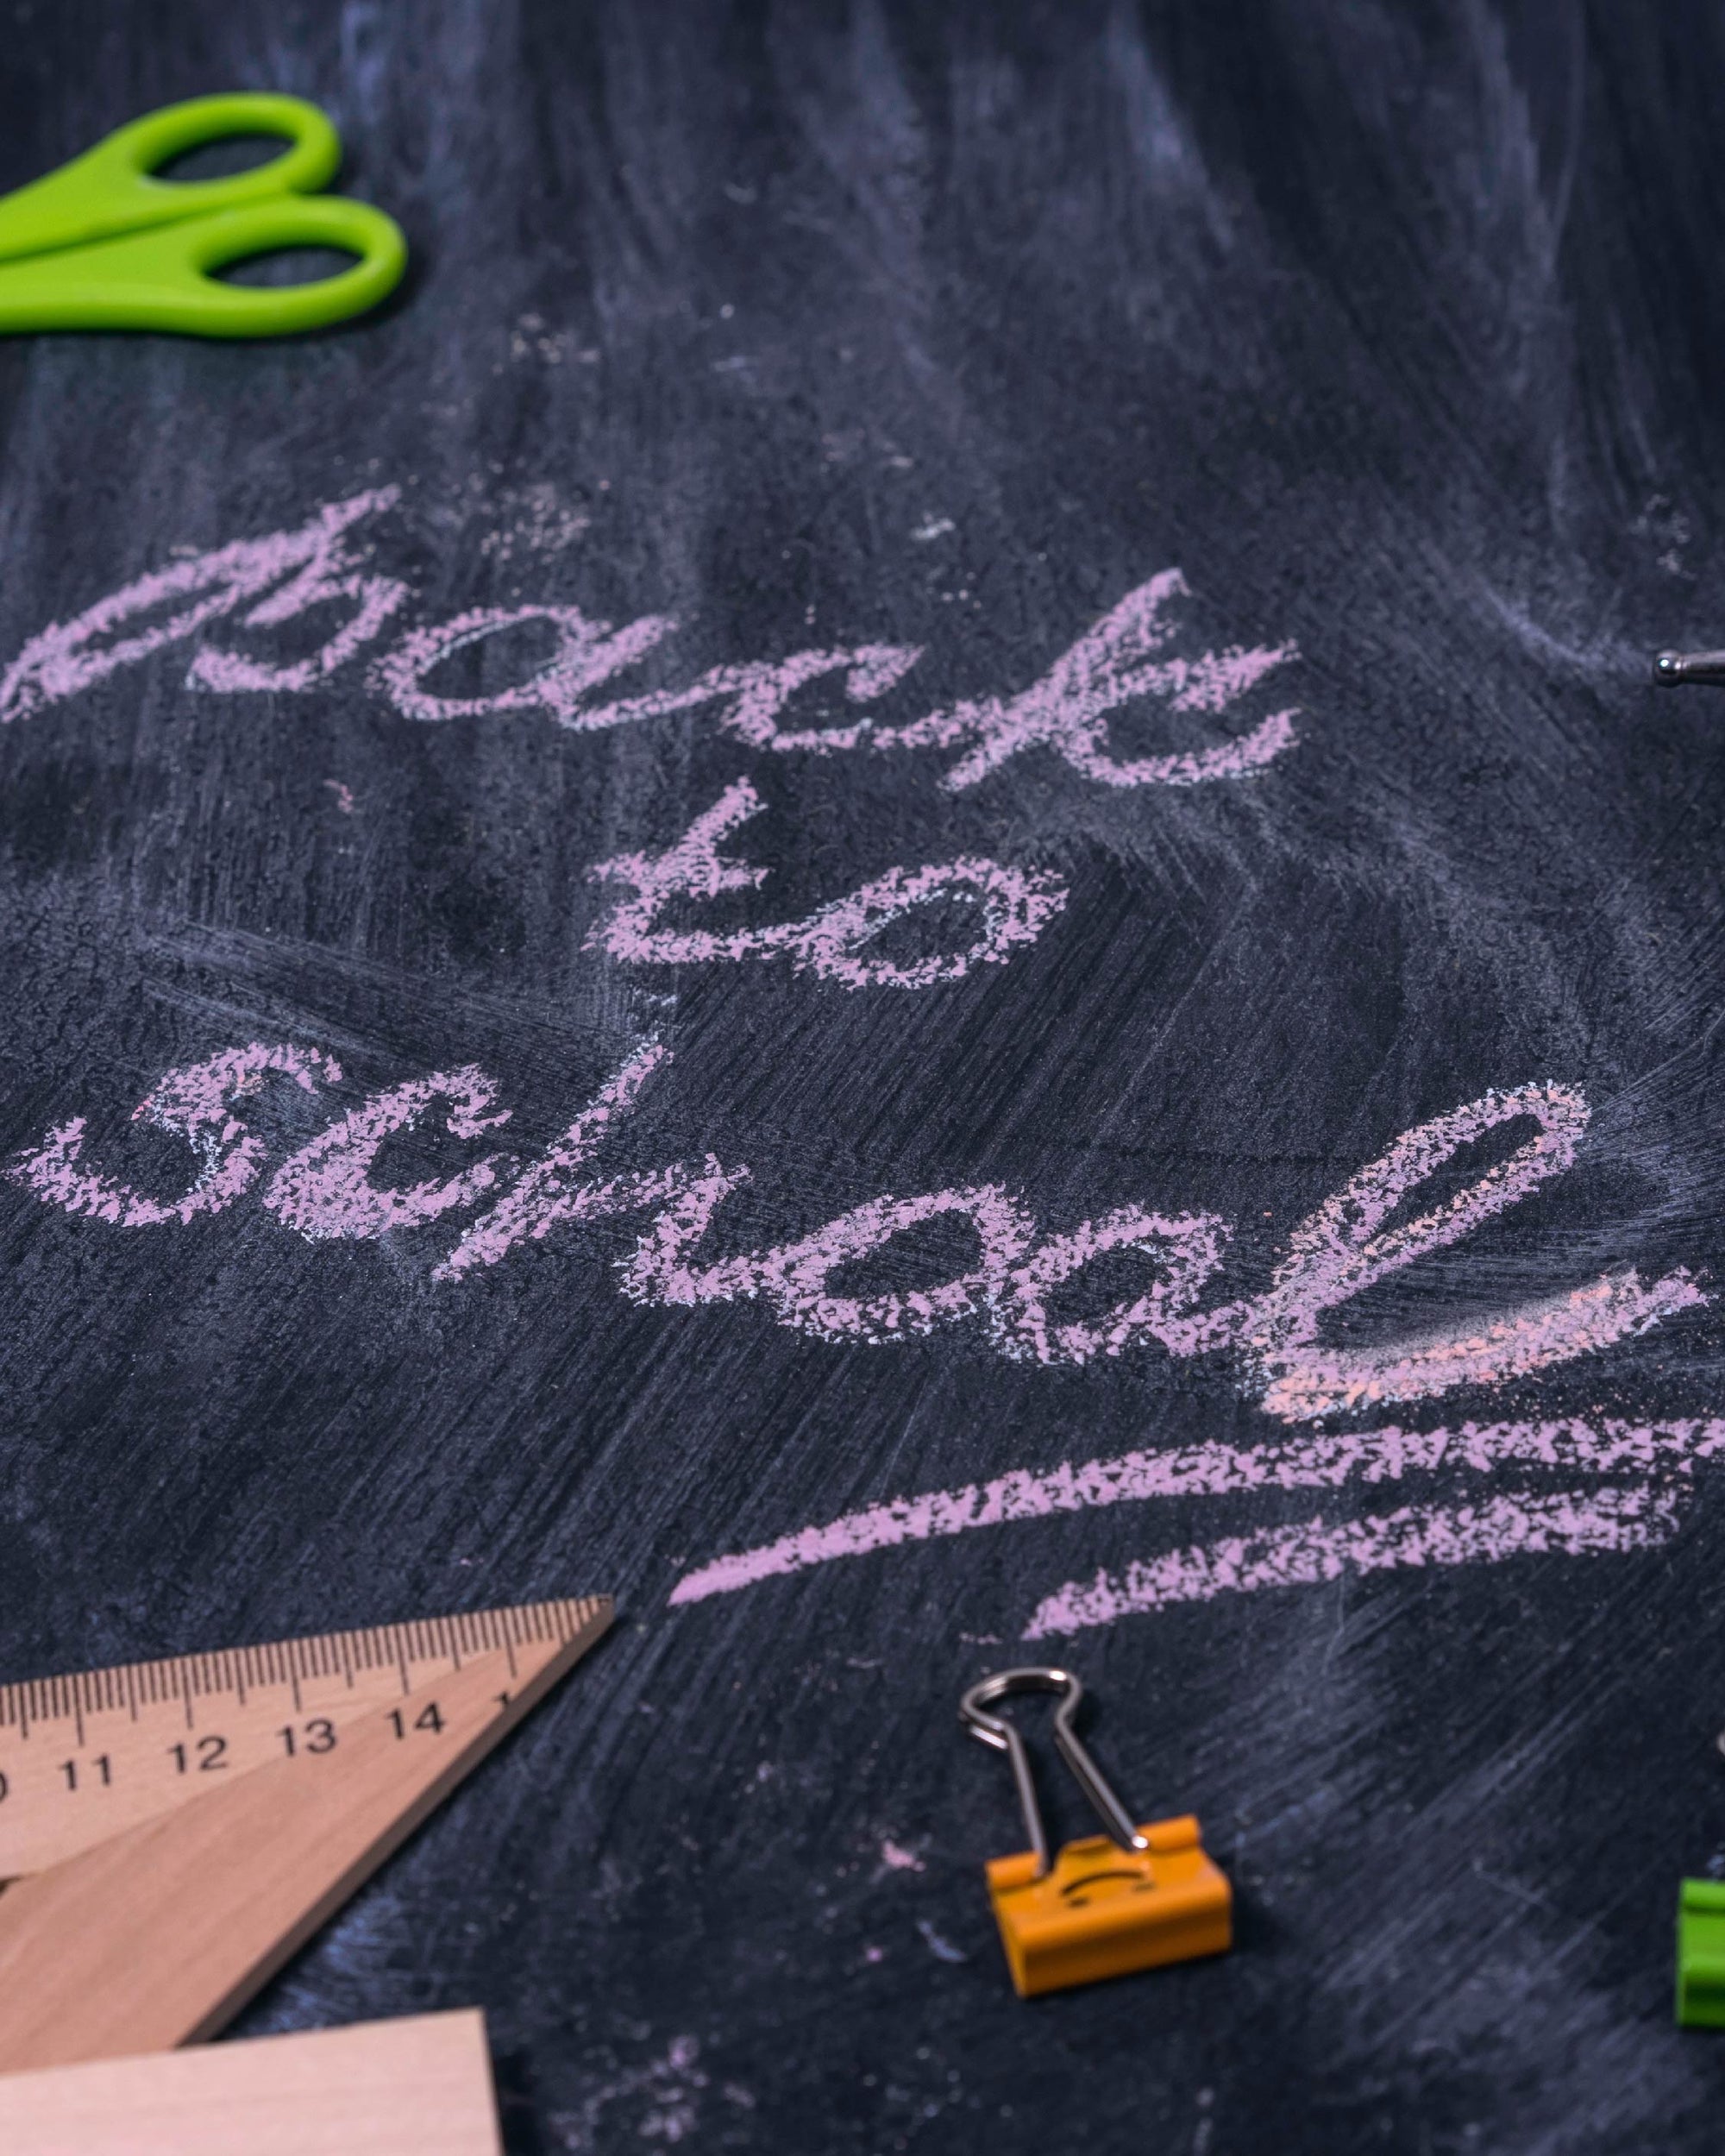 3 Tips for Back-to-School Health and Wellness